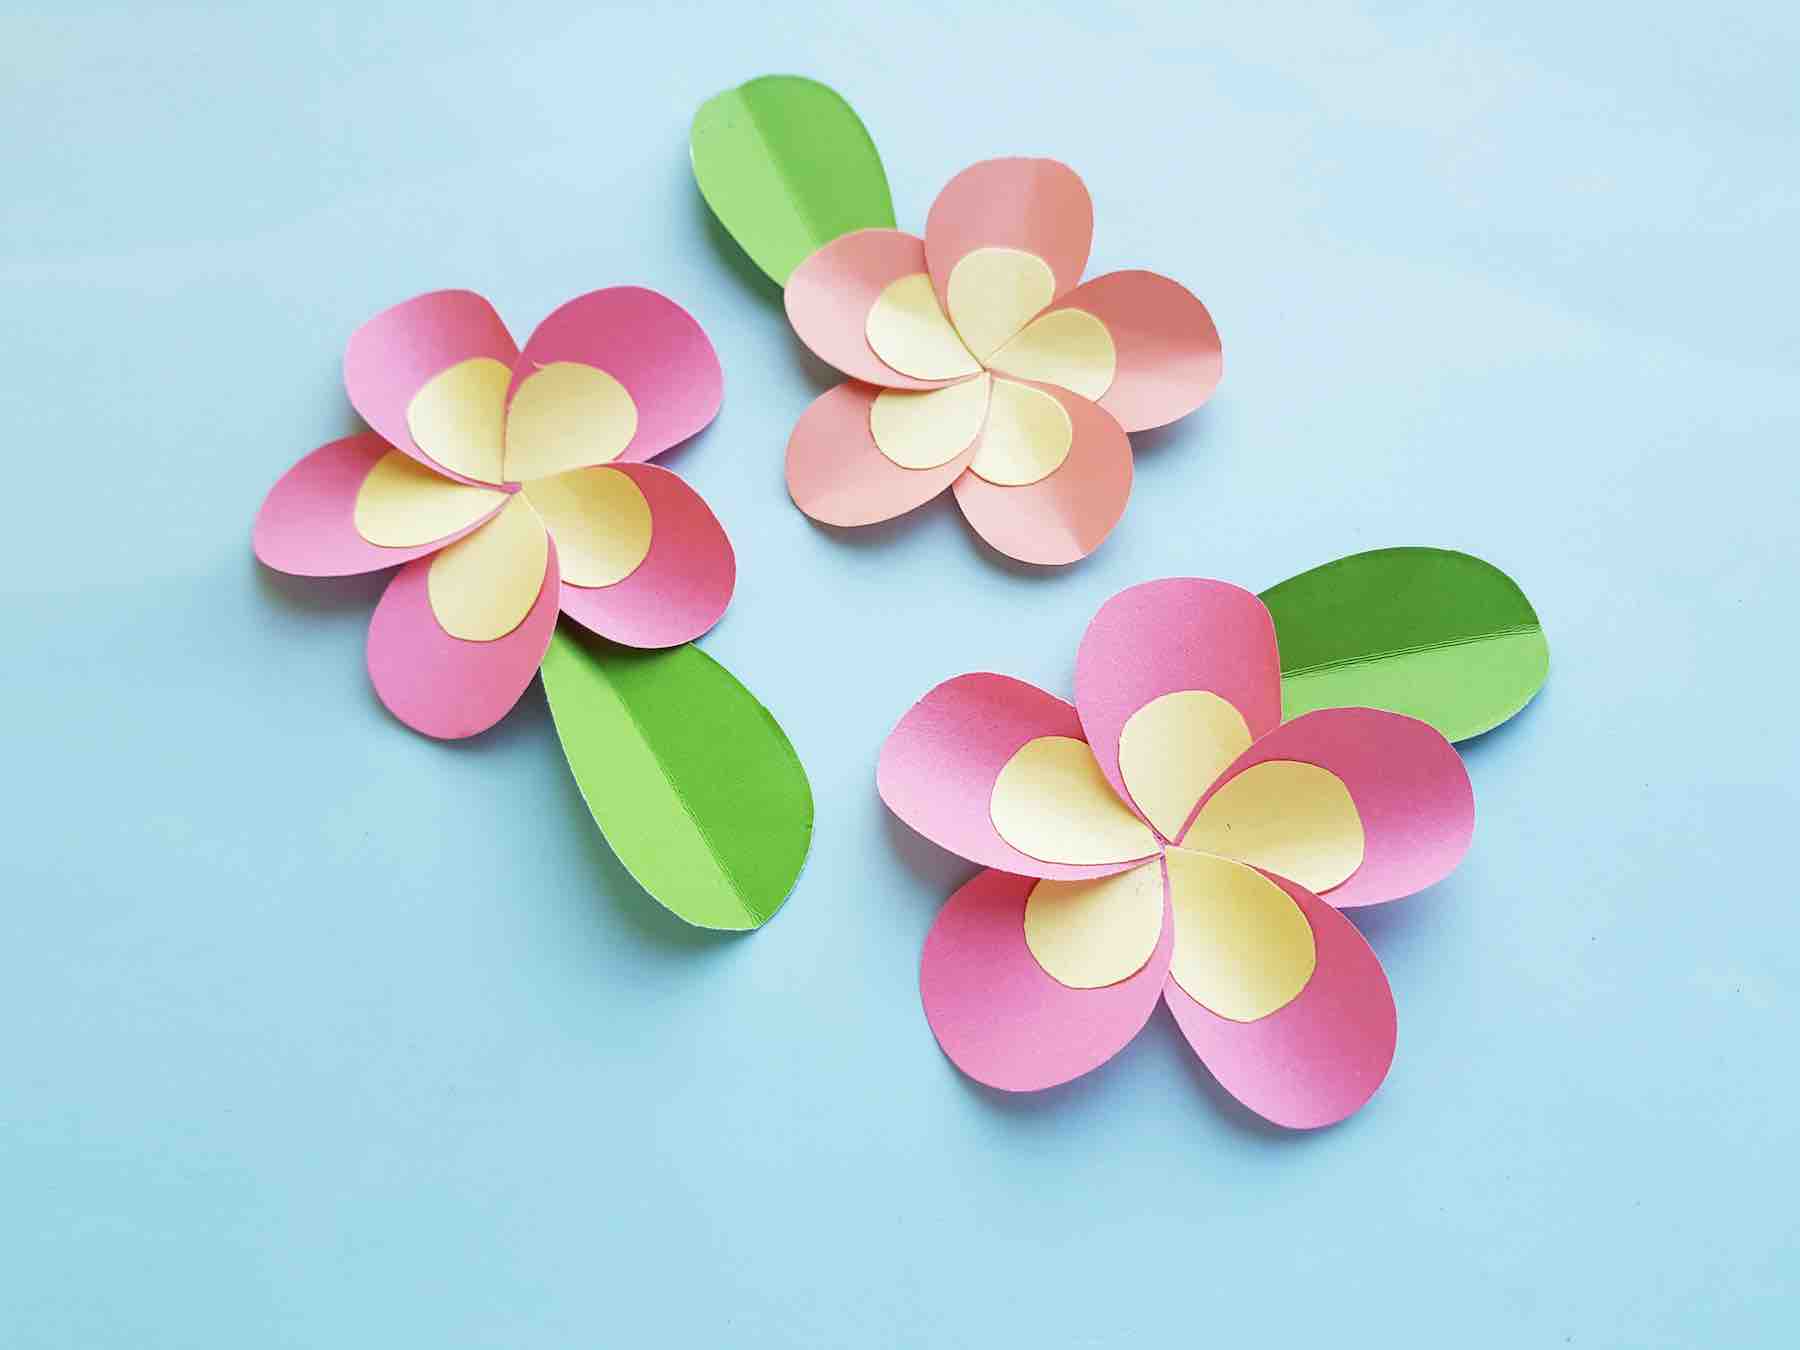 Learn how to make a plumeria paper flower craft by top Hawaii blog Hawaii Travel with Kids. Image of 3 pink plumeria flowers made out of paper.